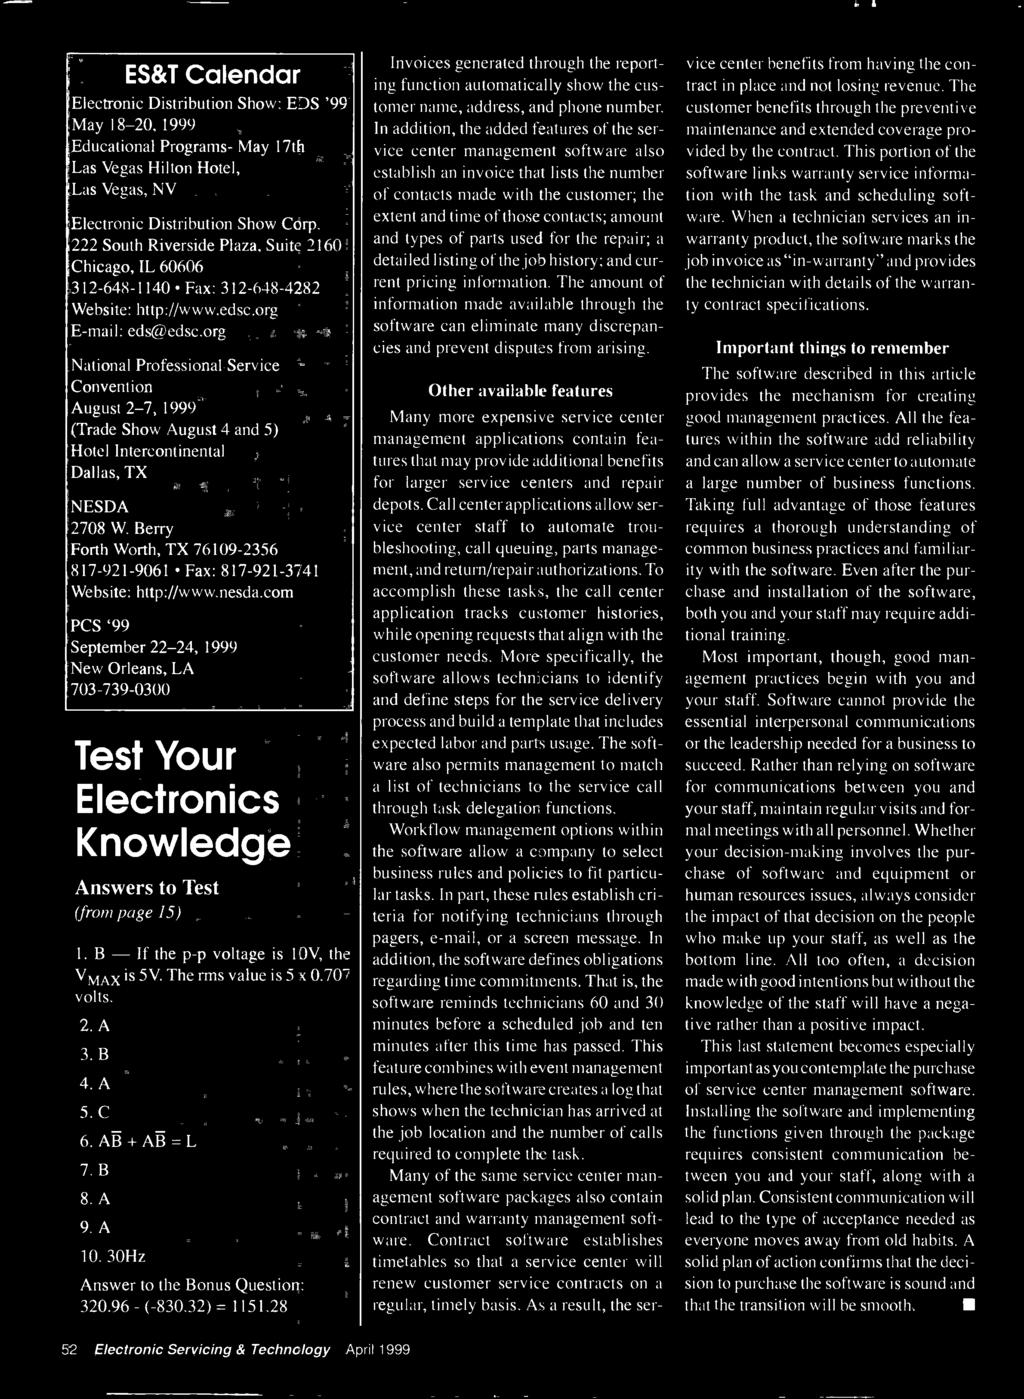 com PCS '99 September 22-24, 1999 New Orleans, LA 703-739-0300 Test Your Electronics Knowledge Answers to Test (from page 15) 1. B - f the p -p voltage is 10V, the VMAxis5V. The rms value is5x0.